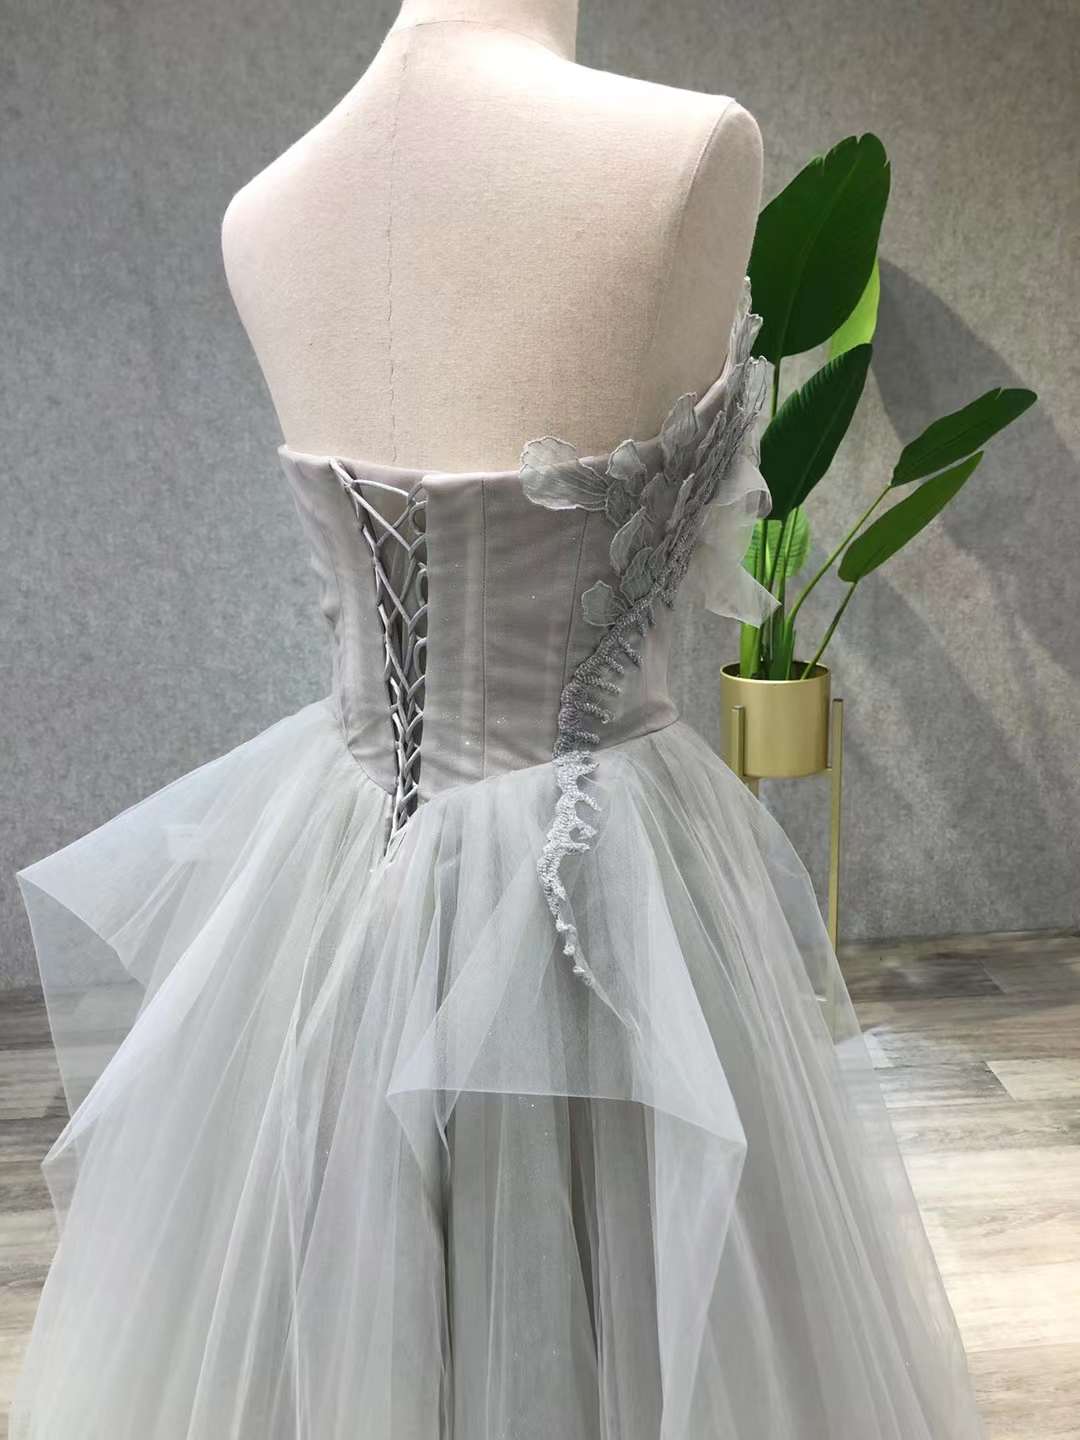 Party Dresses Outfit Ideas, Aline Tea Length Gray Prom Dress, Gray Tulle Homecoming Dress